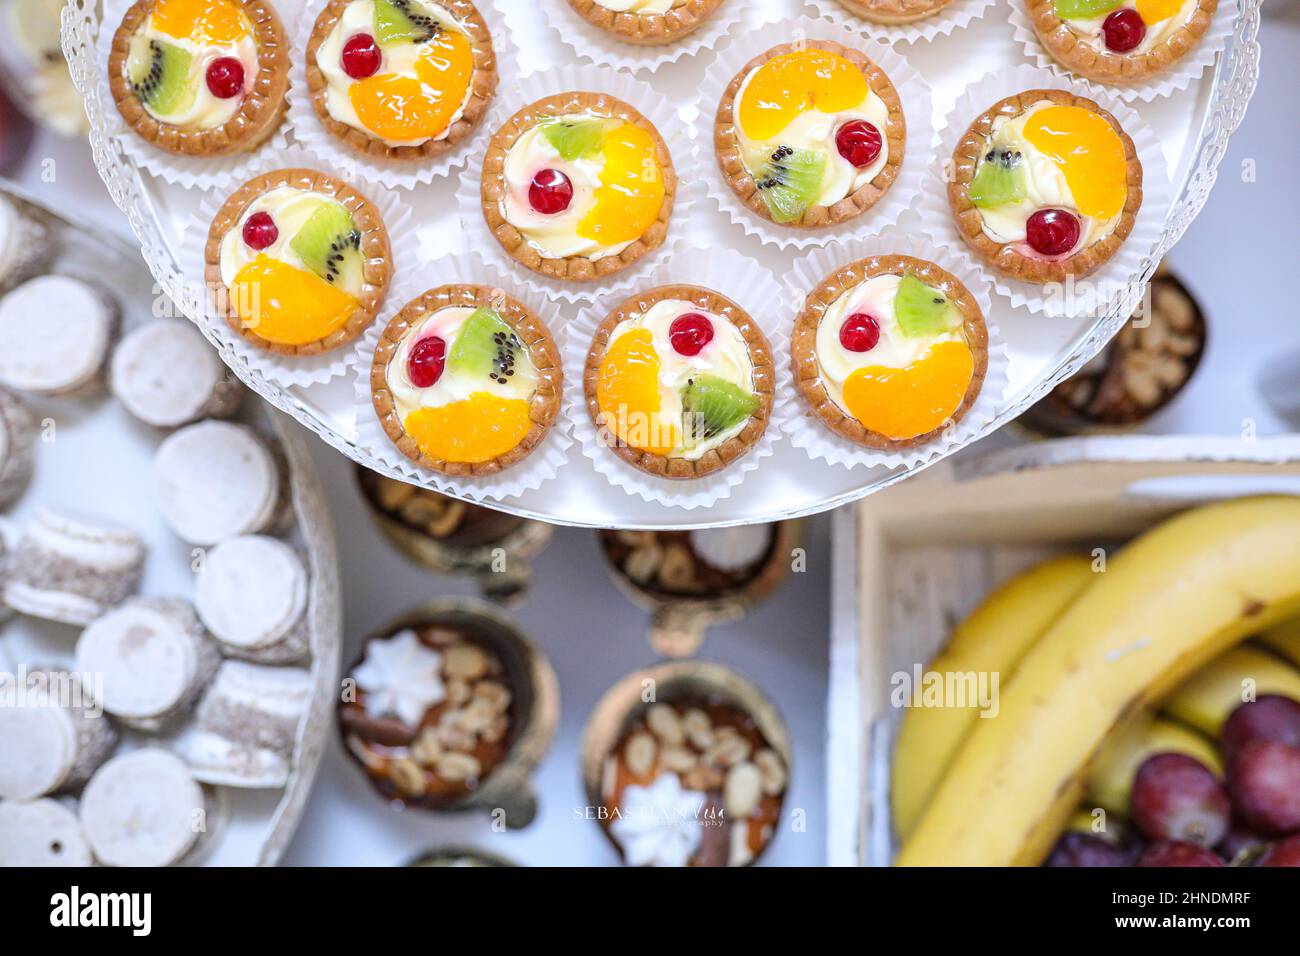 Fruit cupcakes decoration on a plate with cakes and fruits in the background Stock Photo